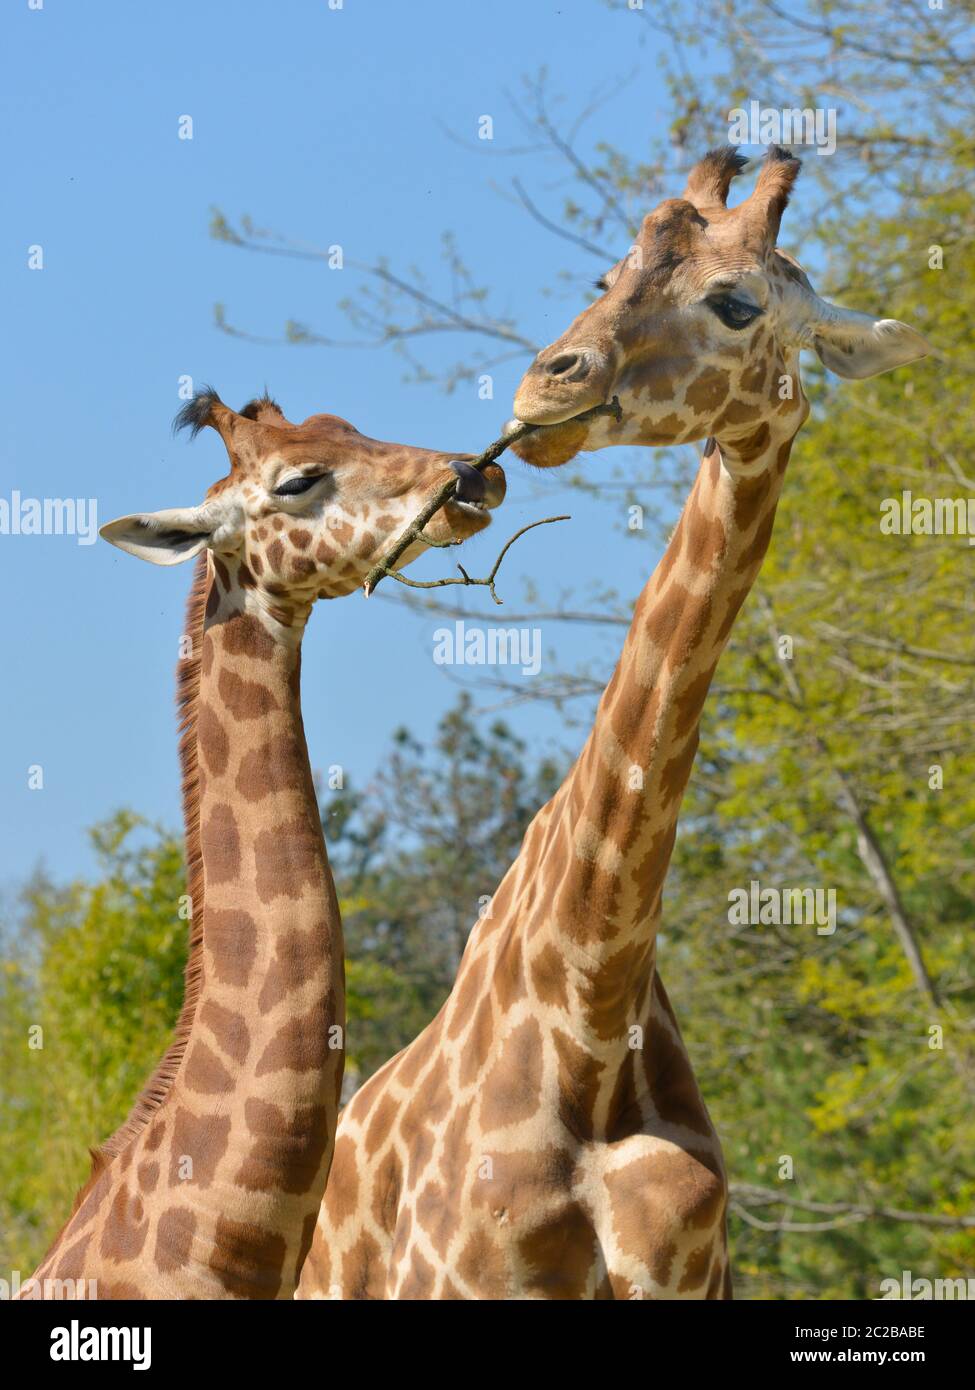 Two giraffes with a twig Stock Photo